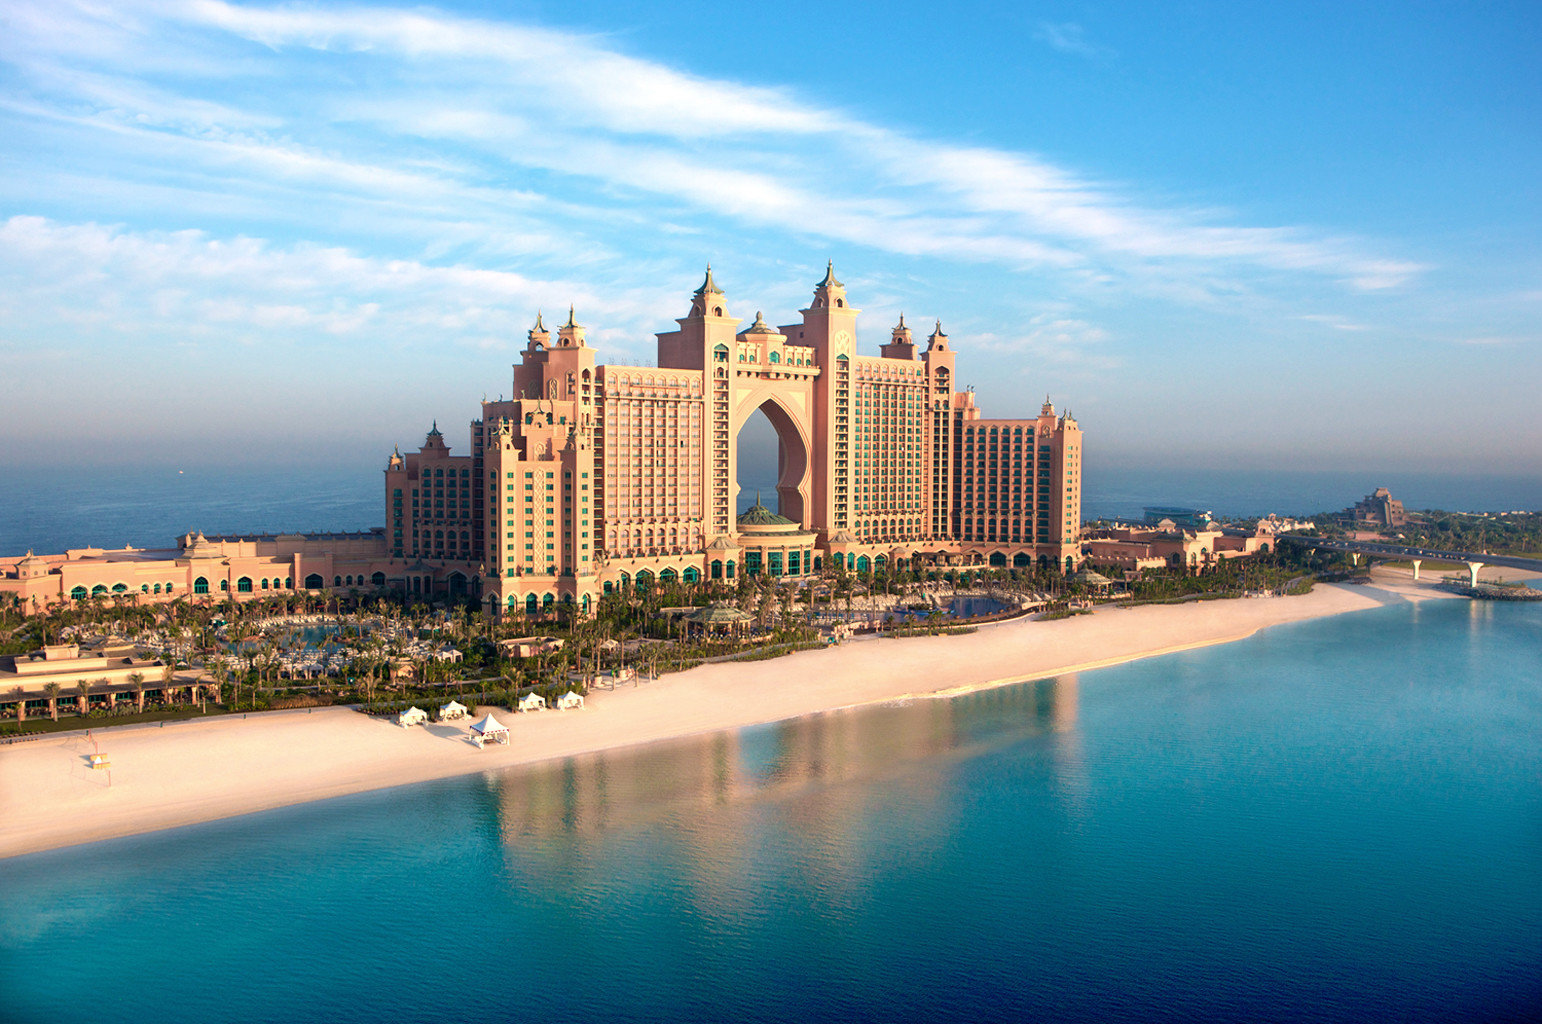 The Best Hotels in Dubai to Stay | Atlantis the Palm